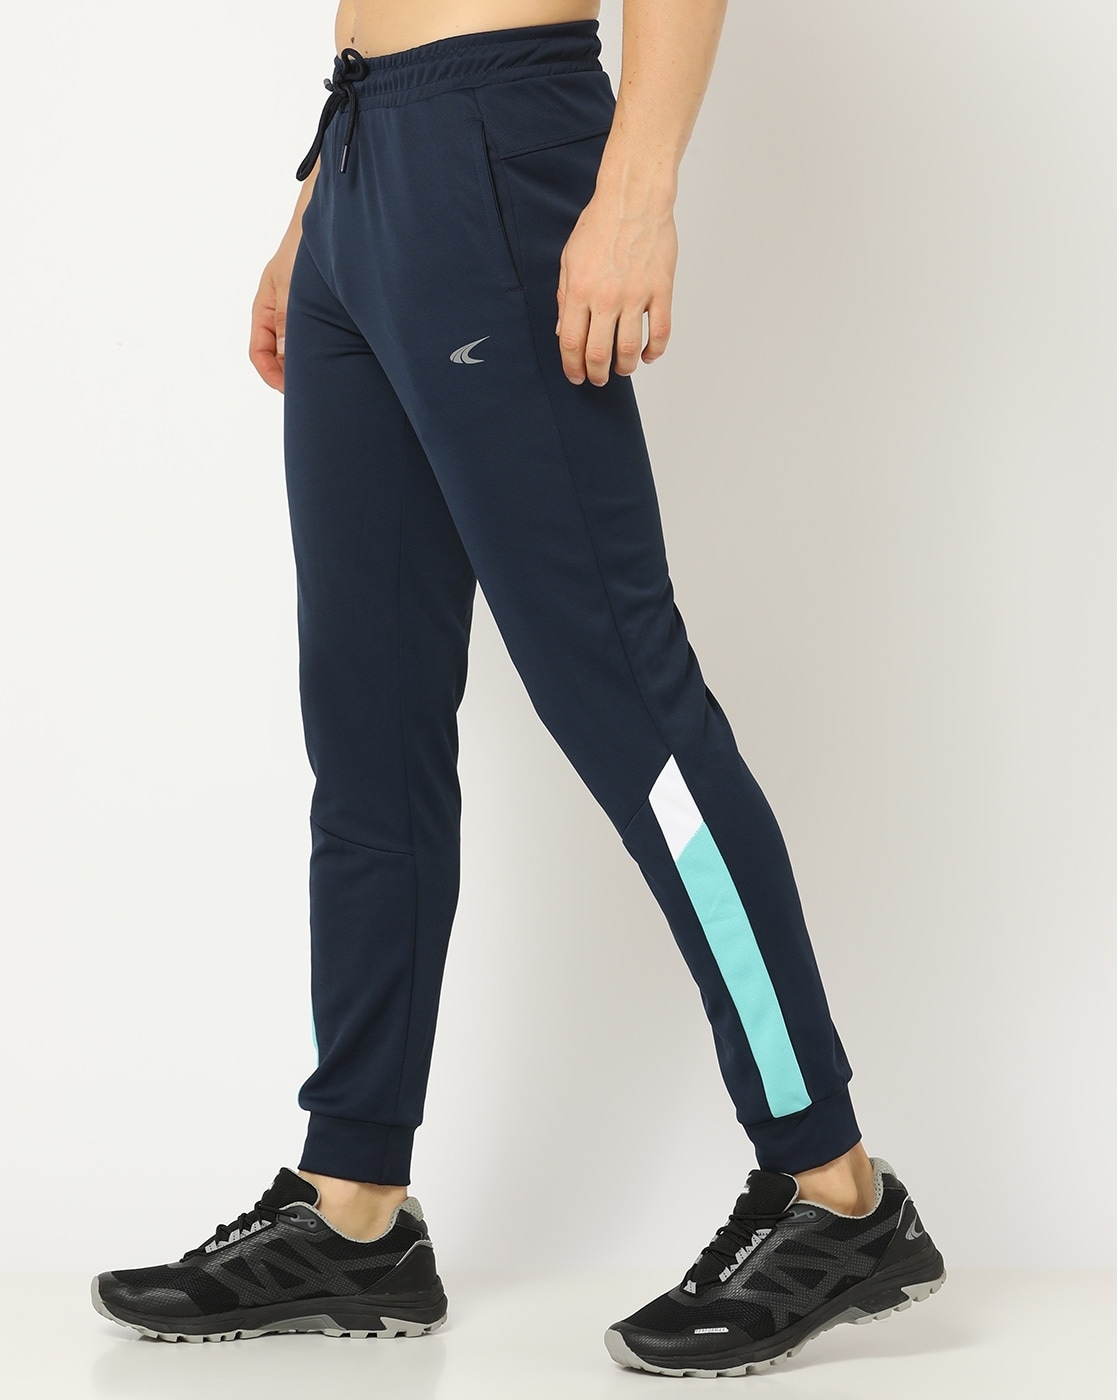 Mens Waterproof Yoga Leggings With Zipper Pocket Loose Fit Performax Track  Pants For Jogging And Training From Luyogasports, $24.52 | DHgate.Com